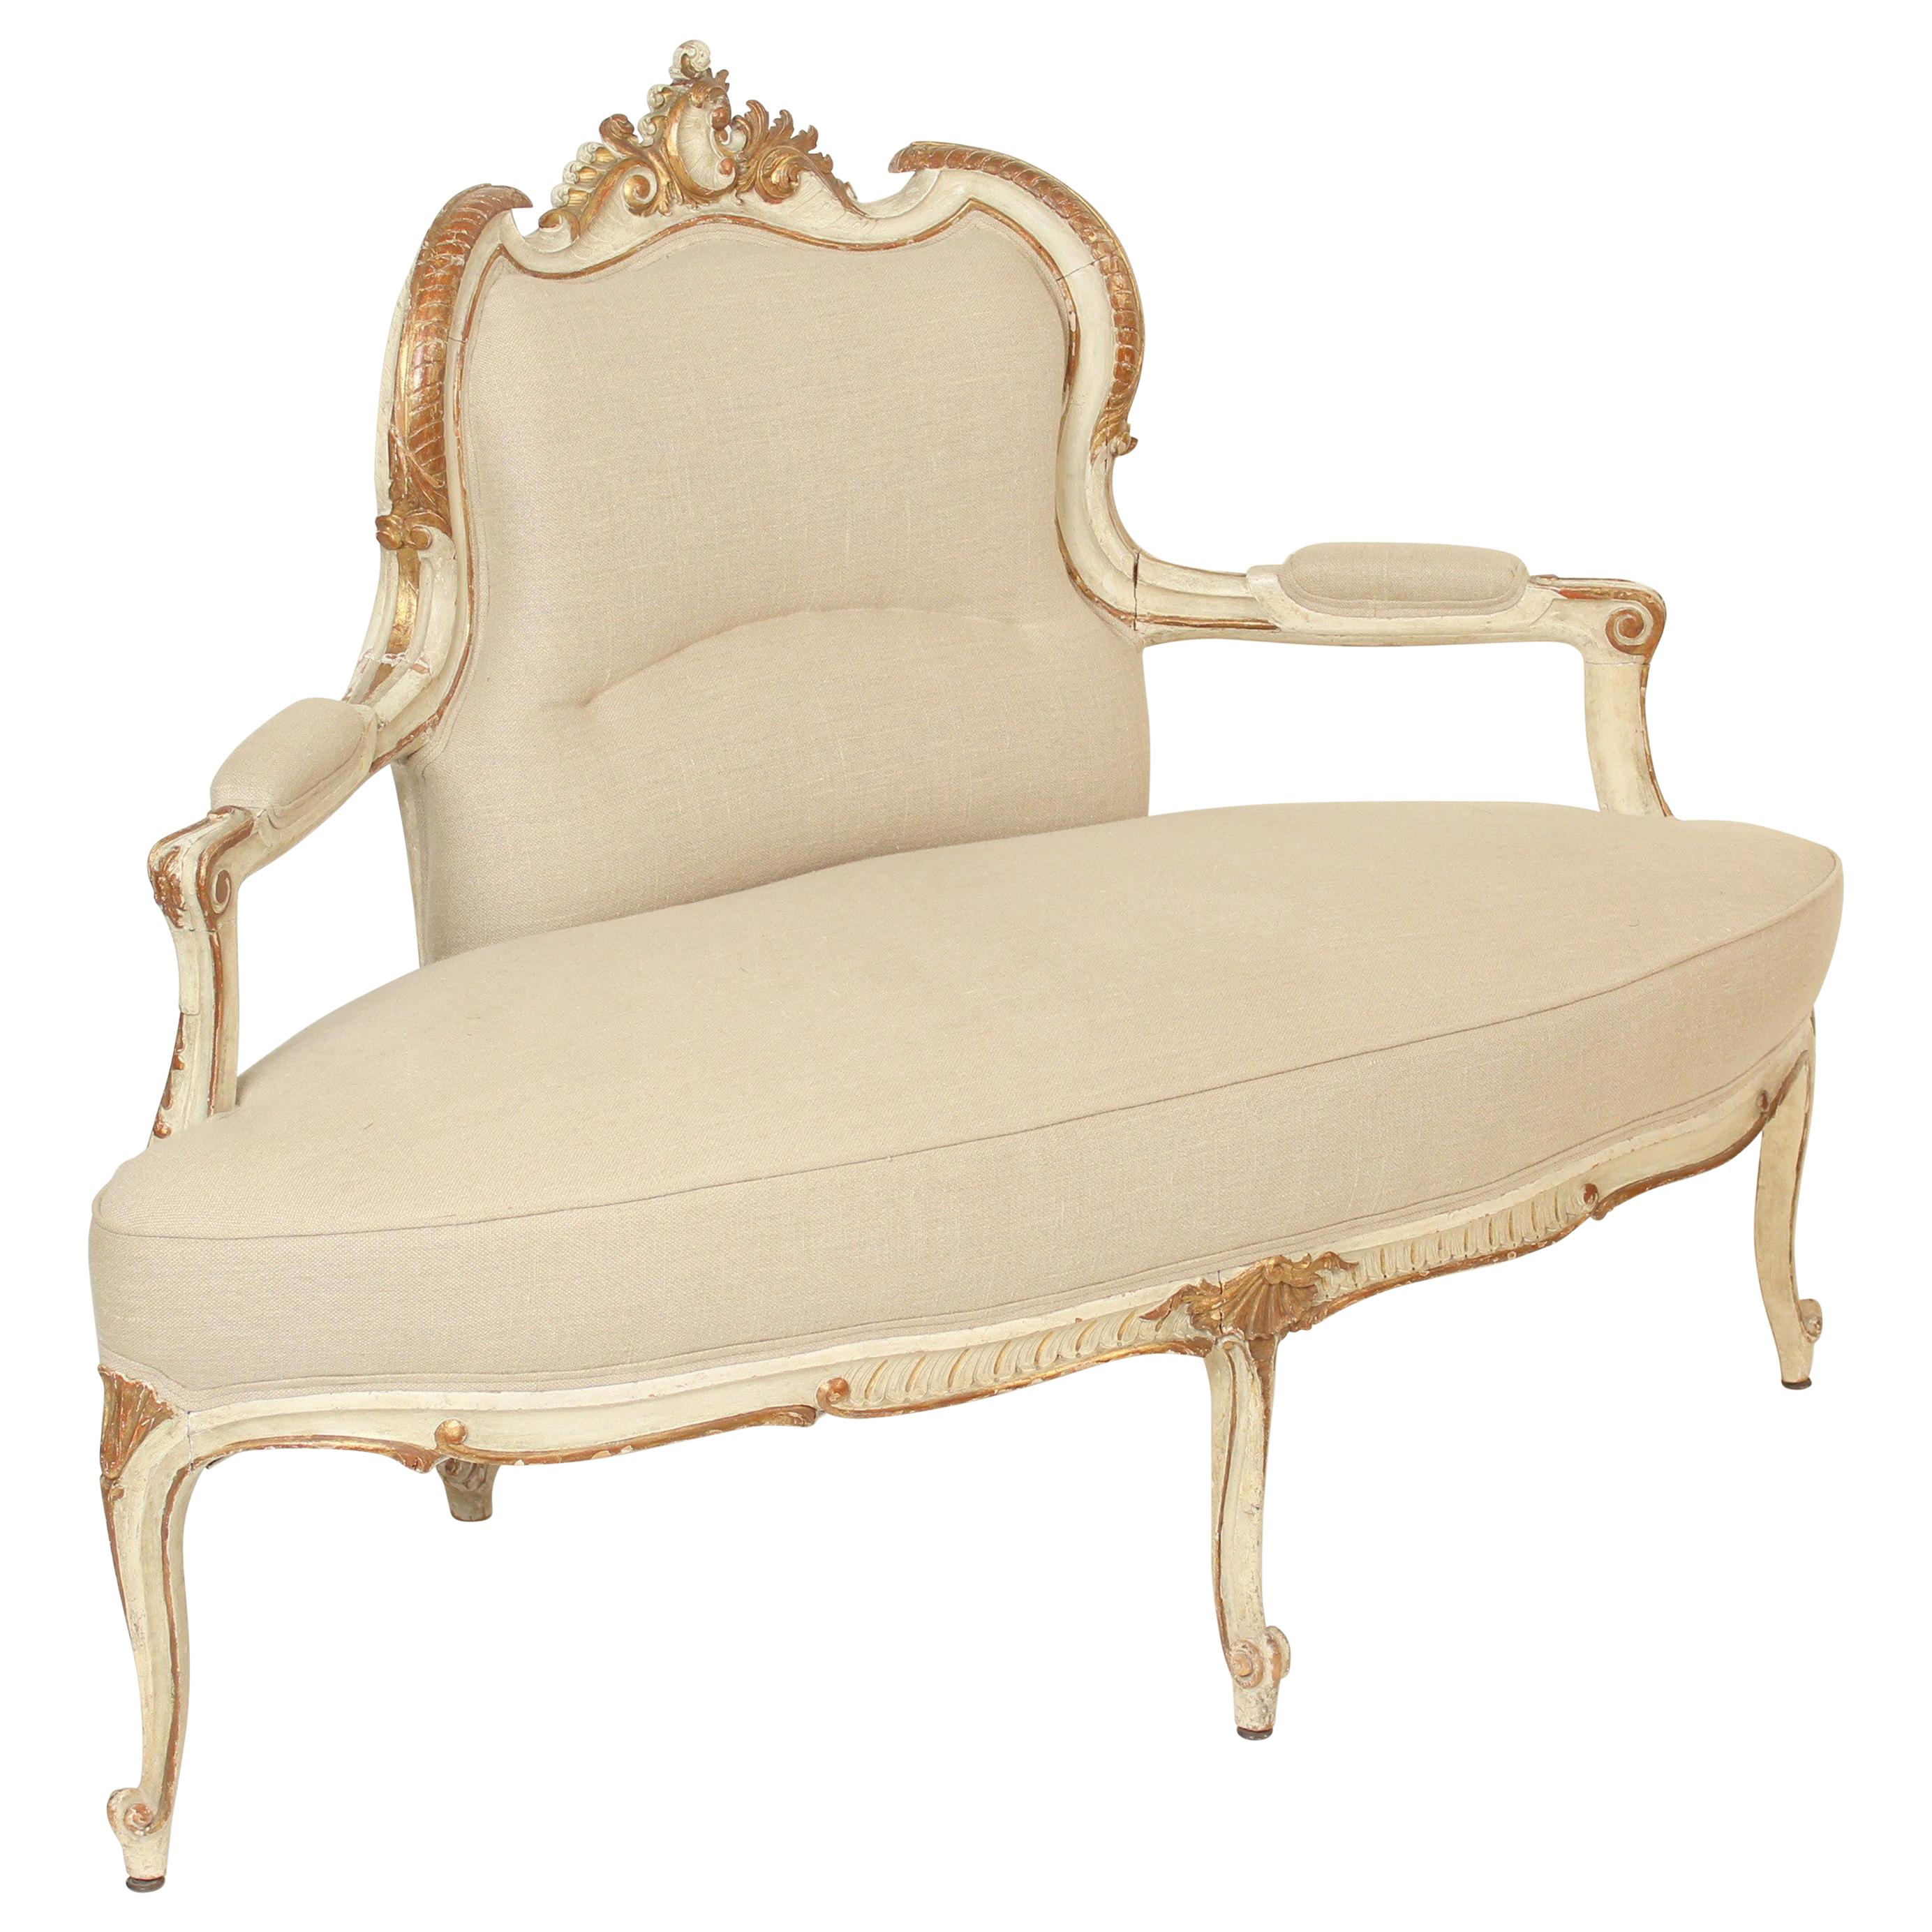 Continental Louis XV Style Painted and Gilt Decorated Settee